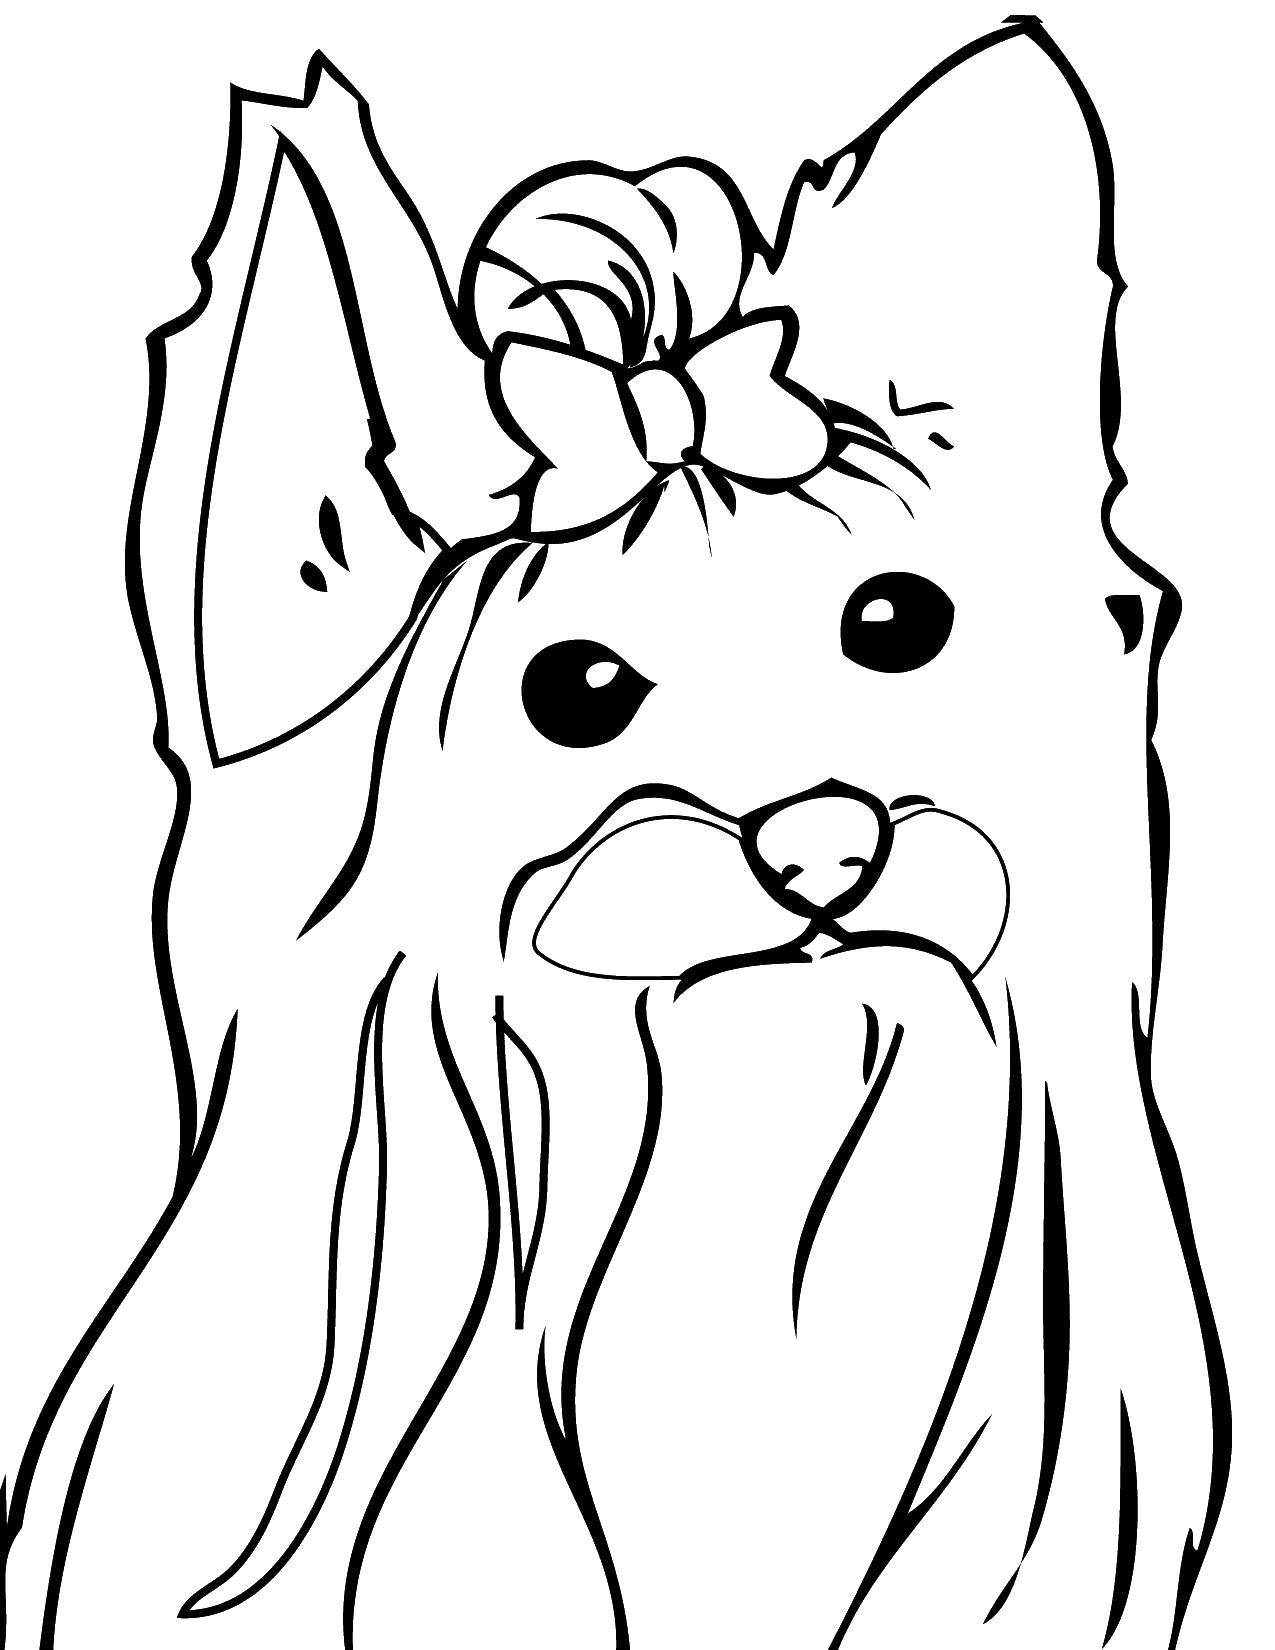 Coloring Shih Tzu. Category dogs. Tags:  the dog, Shea.